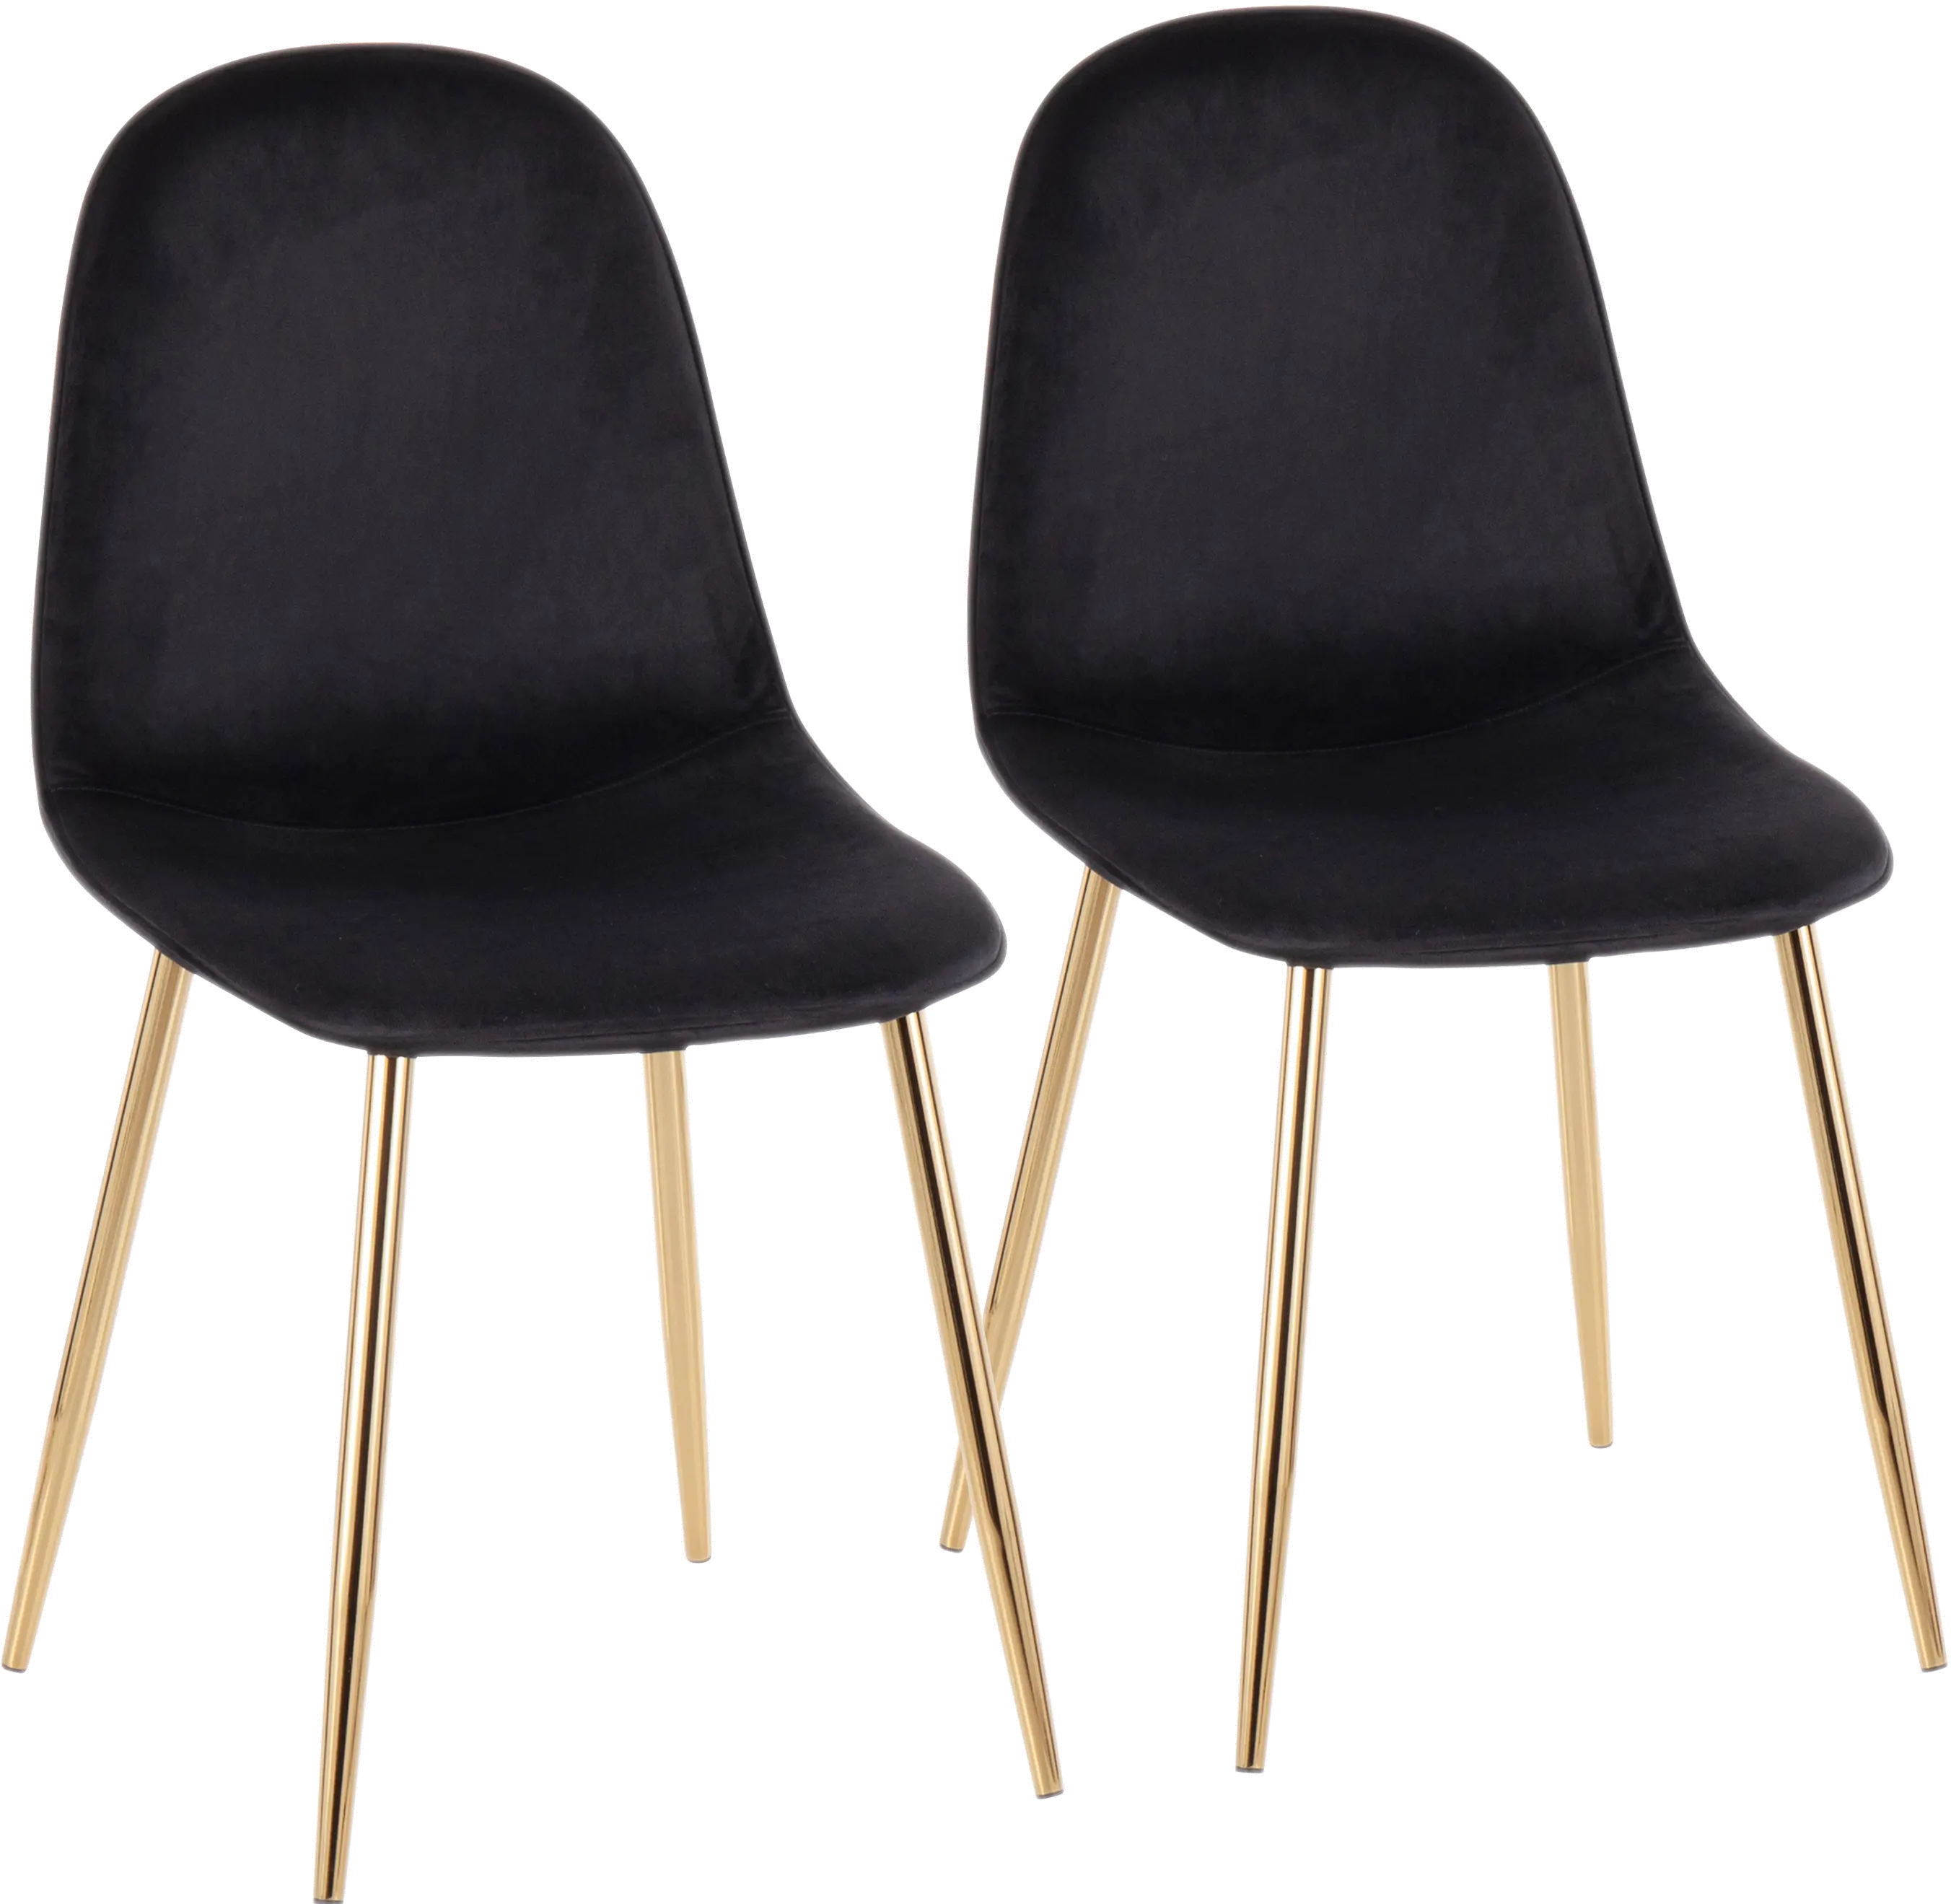 CH-PEBBLEAUVBK2 Contemporary Black and Gold Dining Room Chair (Set sku CH-PEBBLEAUVBK2